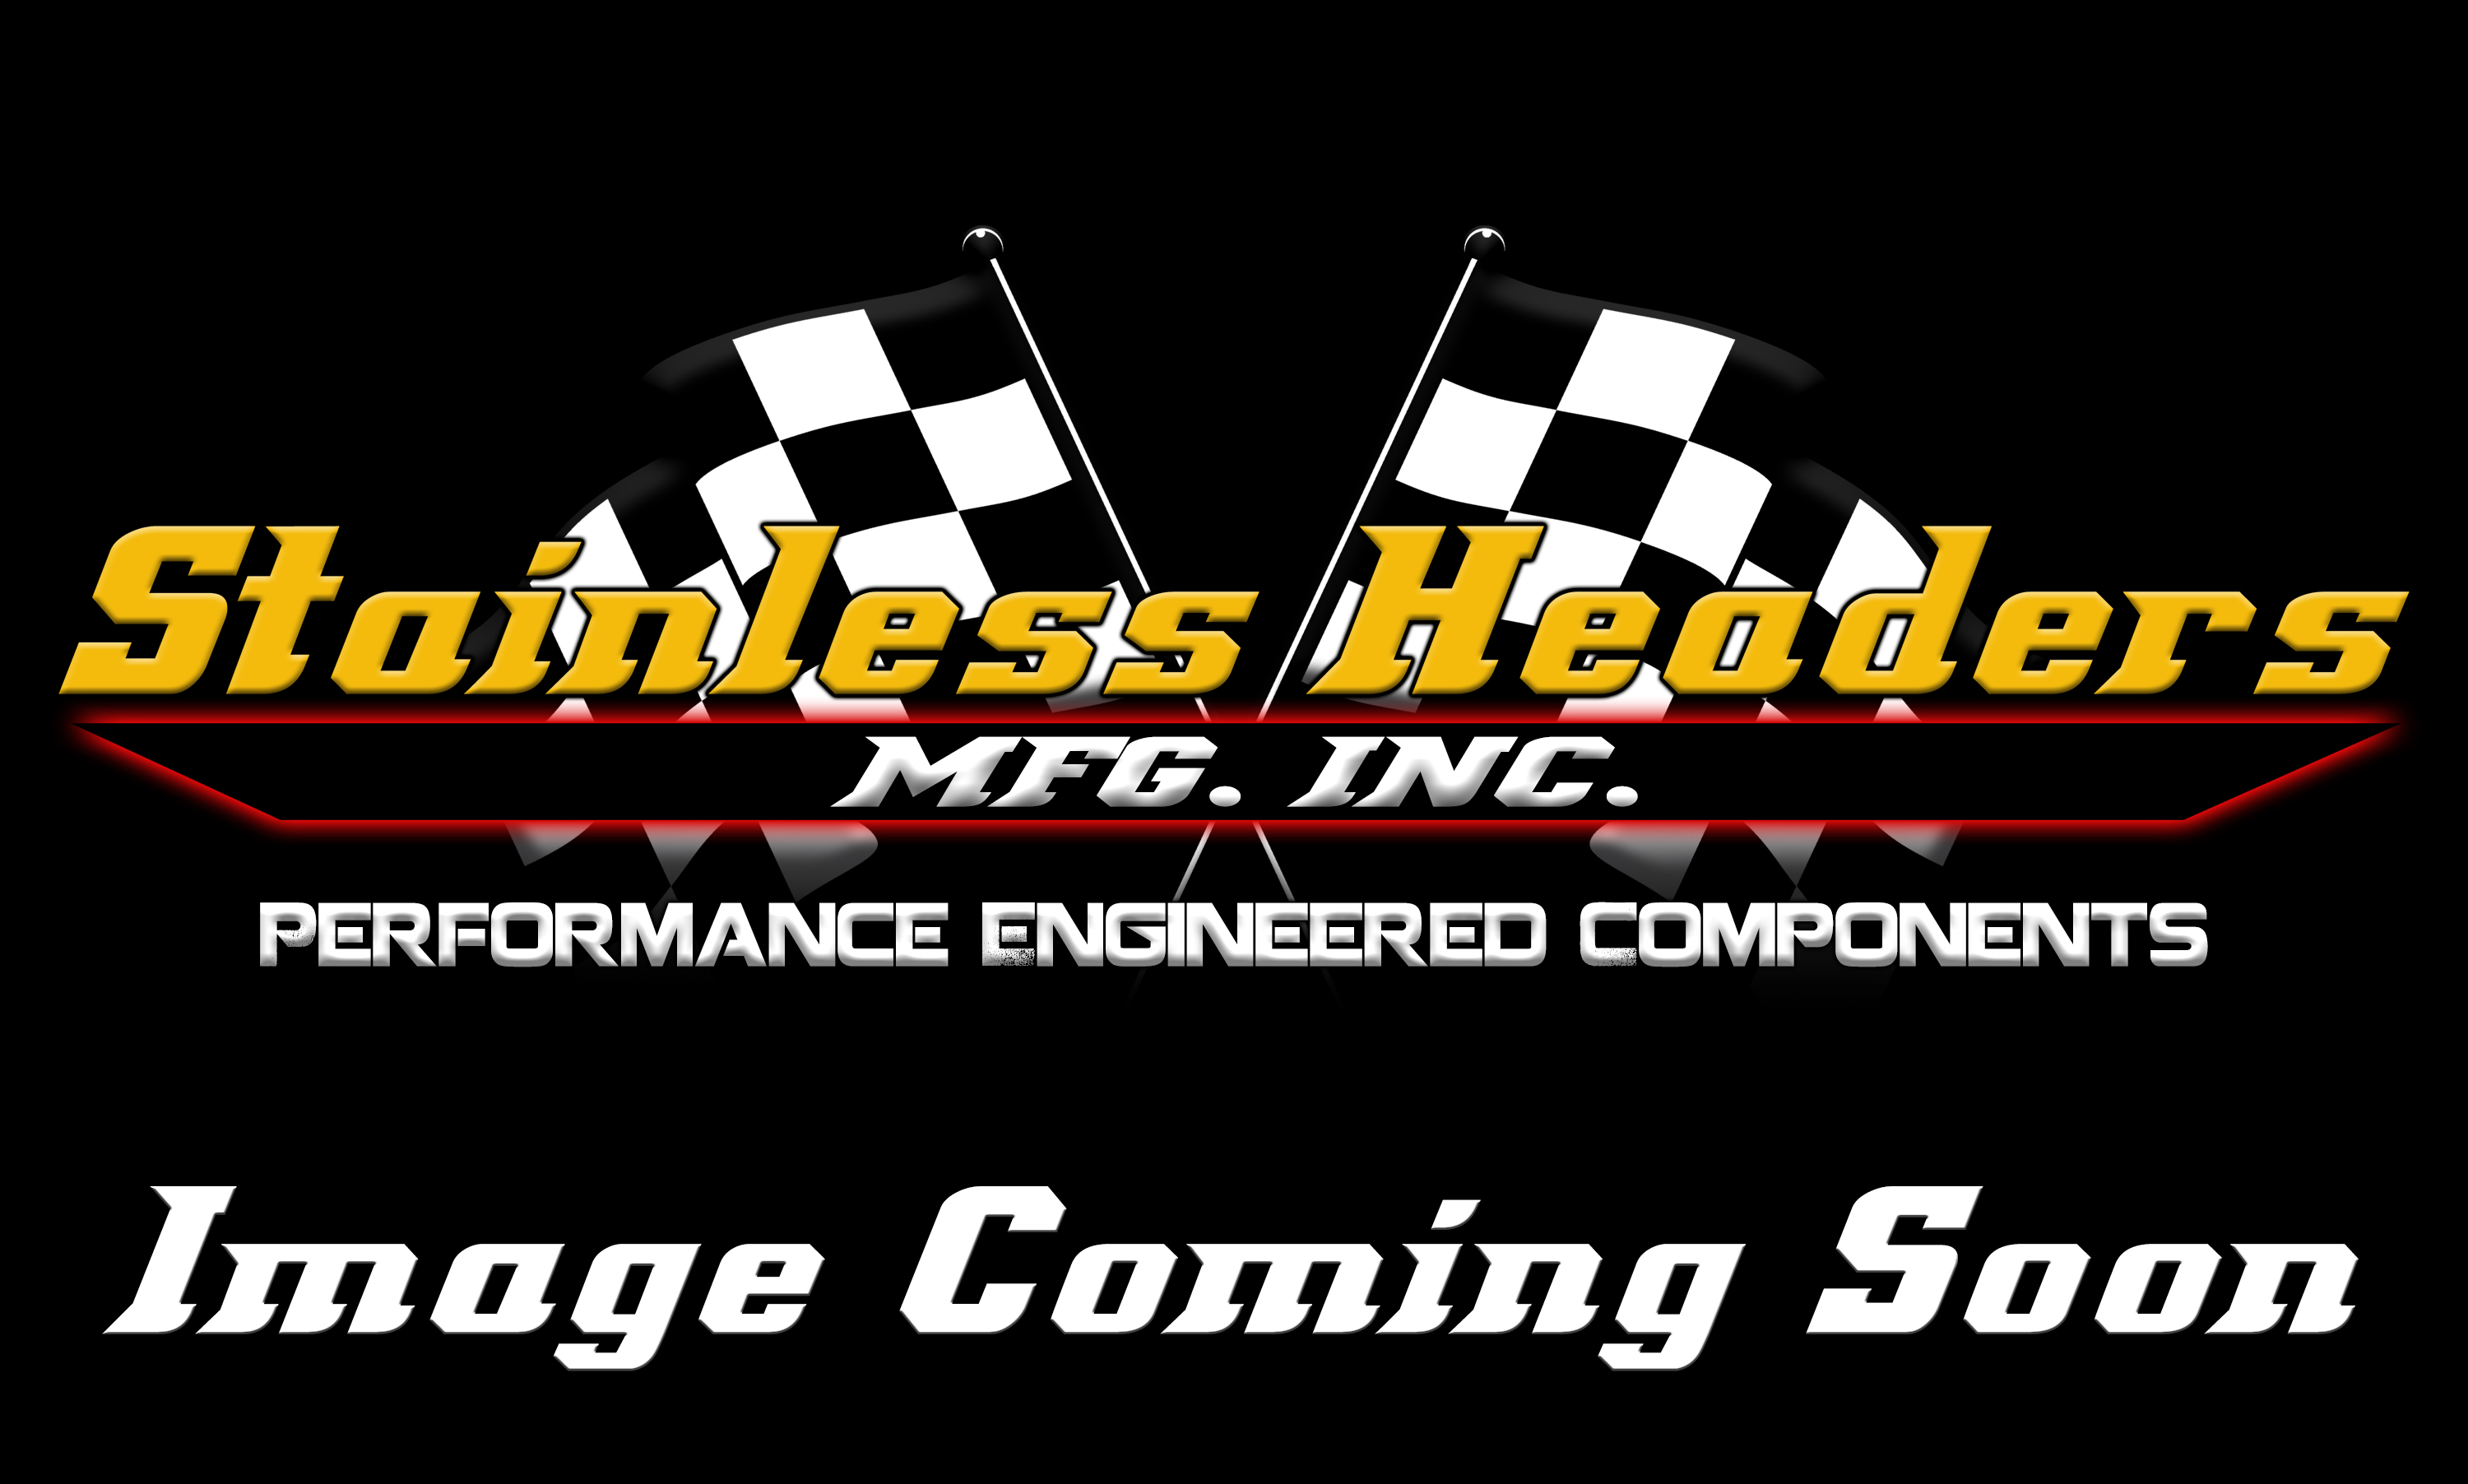 Stainless Headers - 2 1/8" Primary 8 into 1 Performance Merge Collector-16ga 321ss